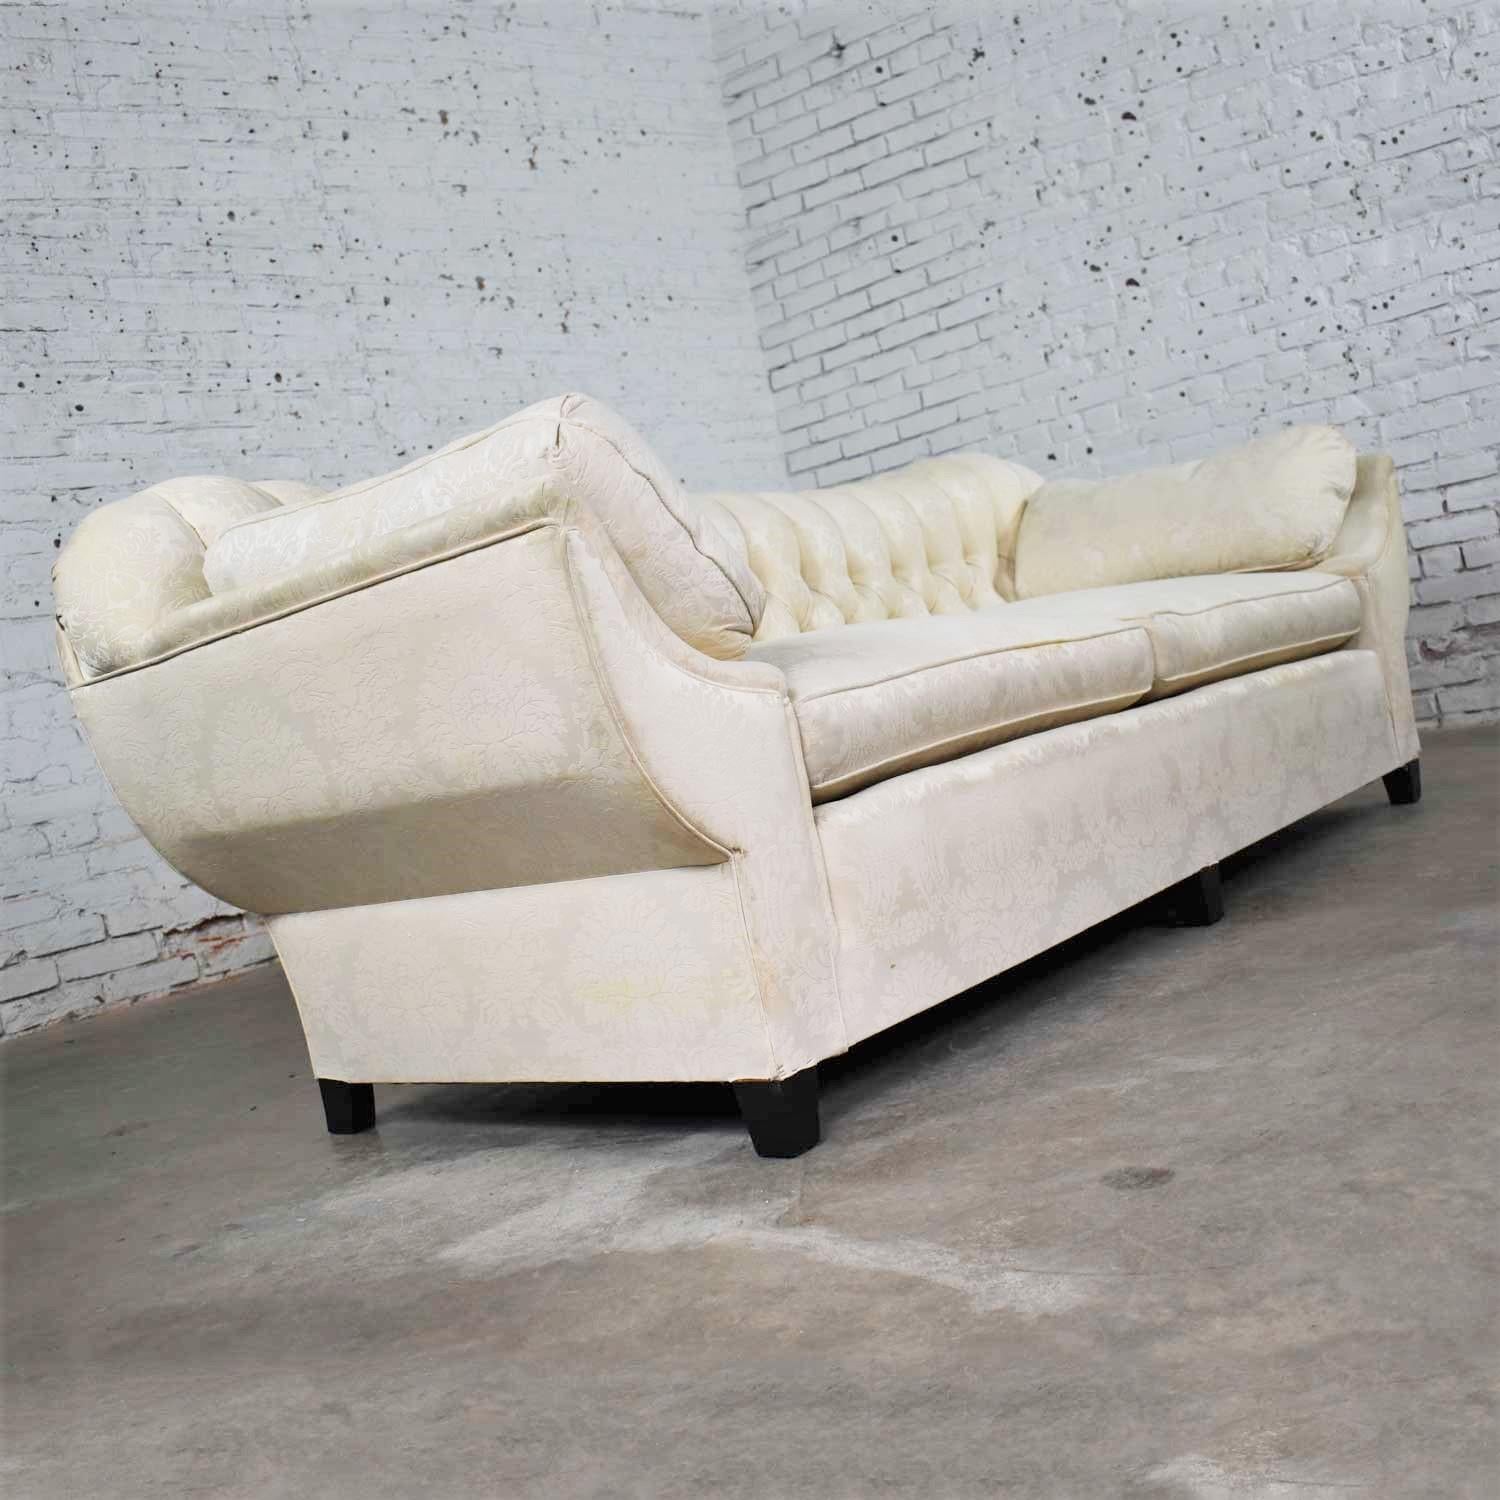 Vintage Art Deco Hollywood Regency Sofa Tufted Back and Concave Pillowed Arms For Sale 10